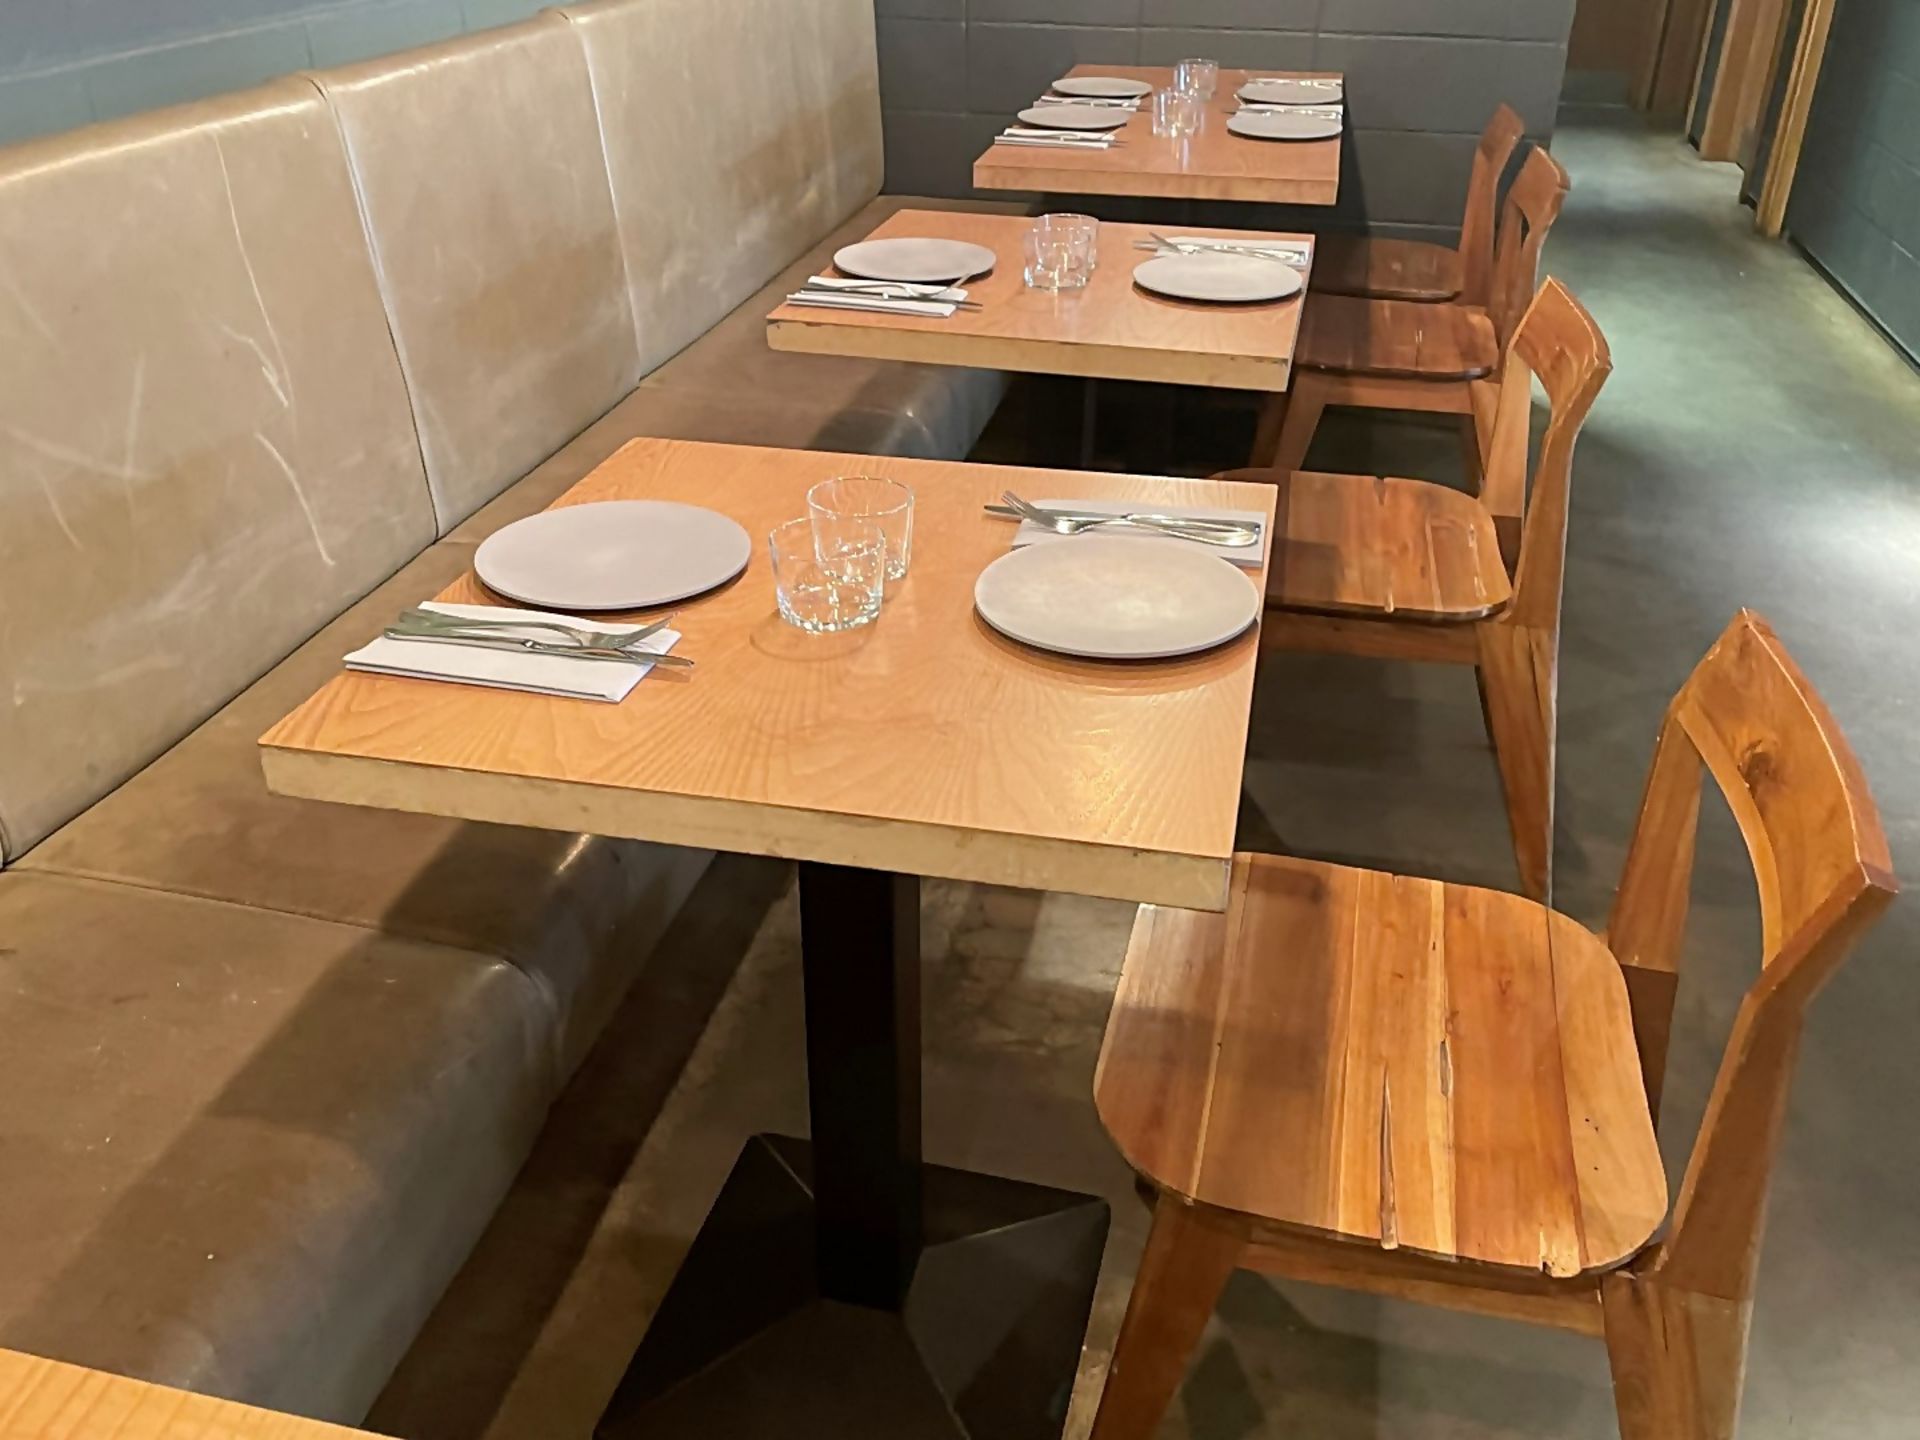 12 x Solid Wood Bistro Dining Chairs - Ref: MAN141 - CL677 - Location: London W1FThis item is to - Image 10 of 12